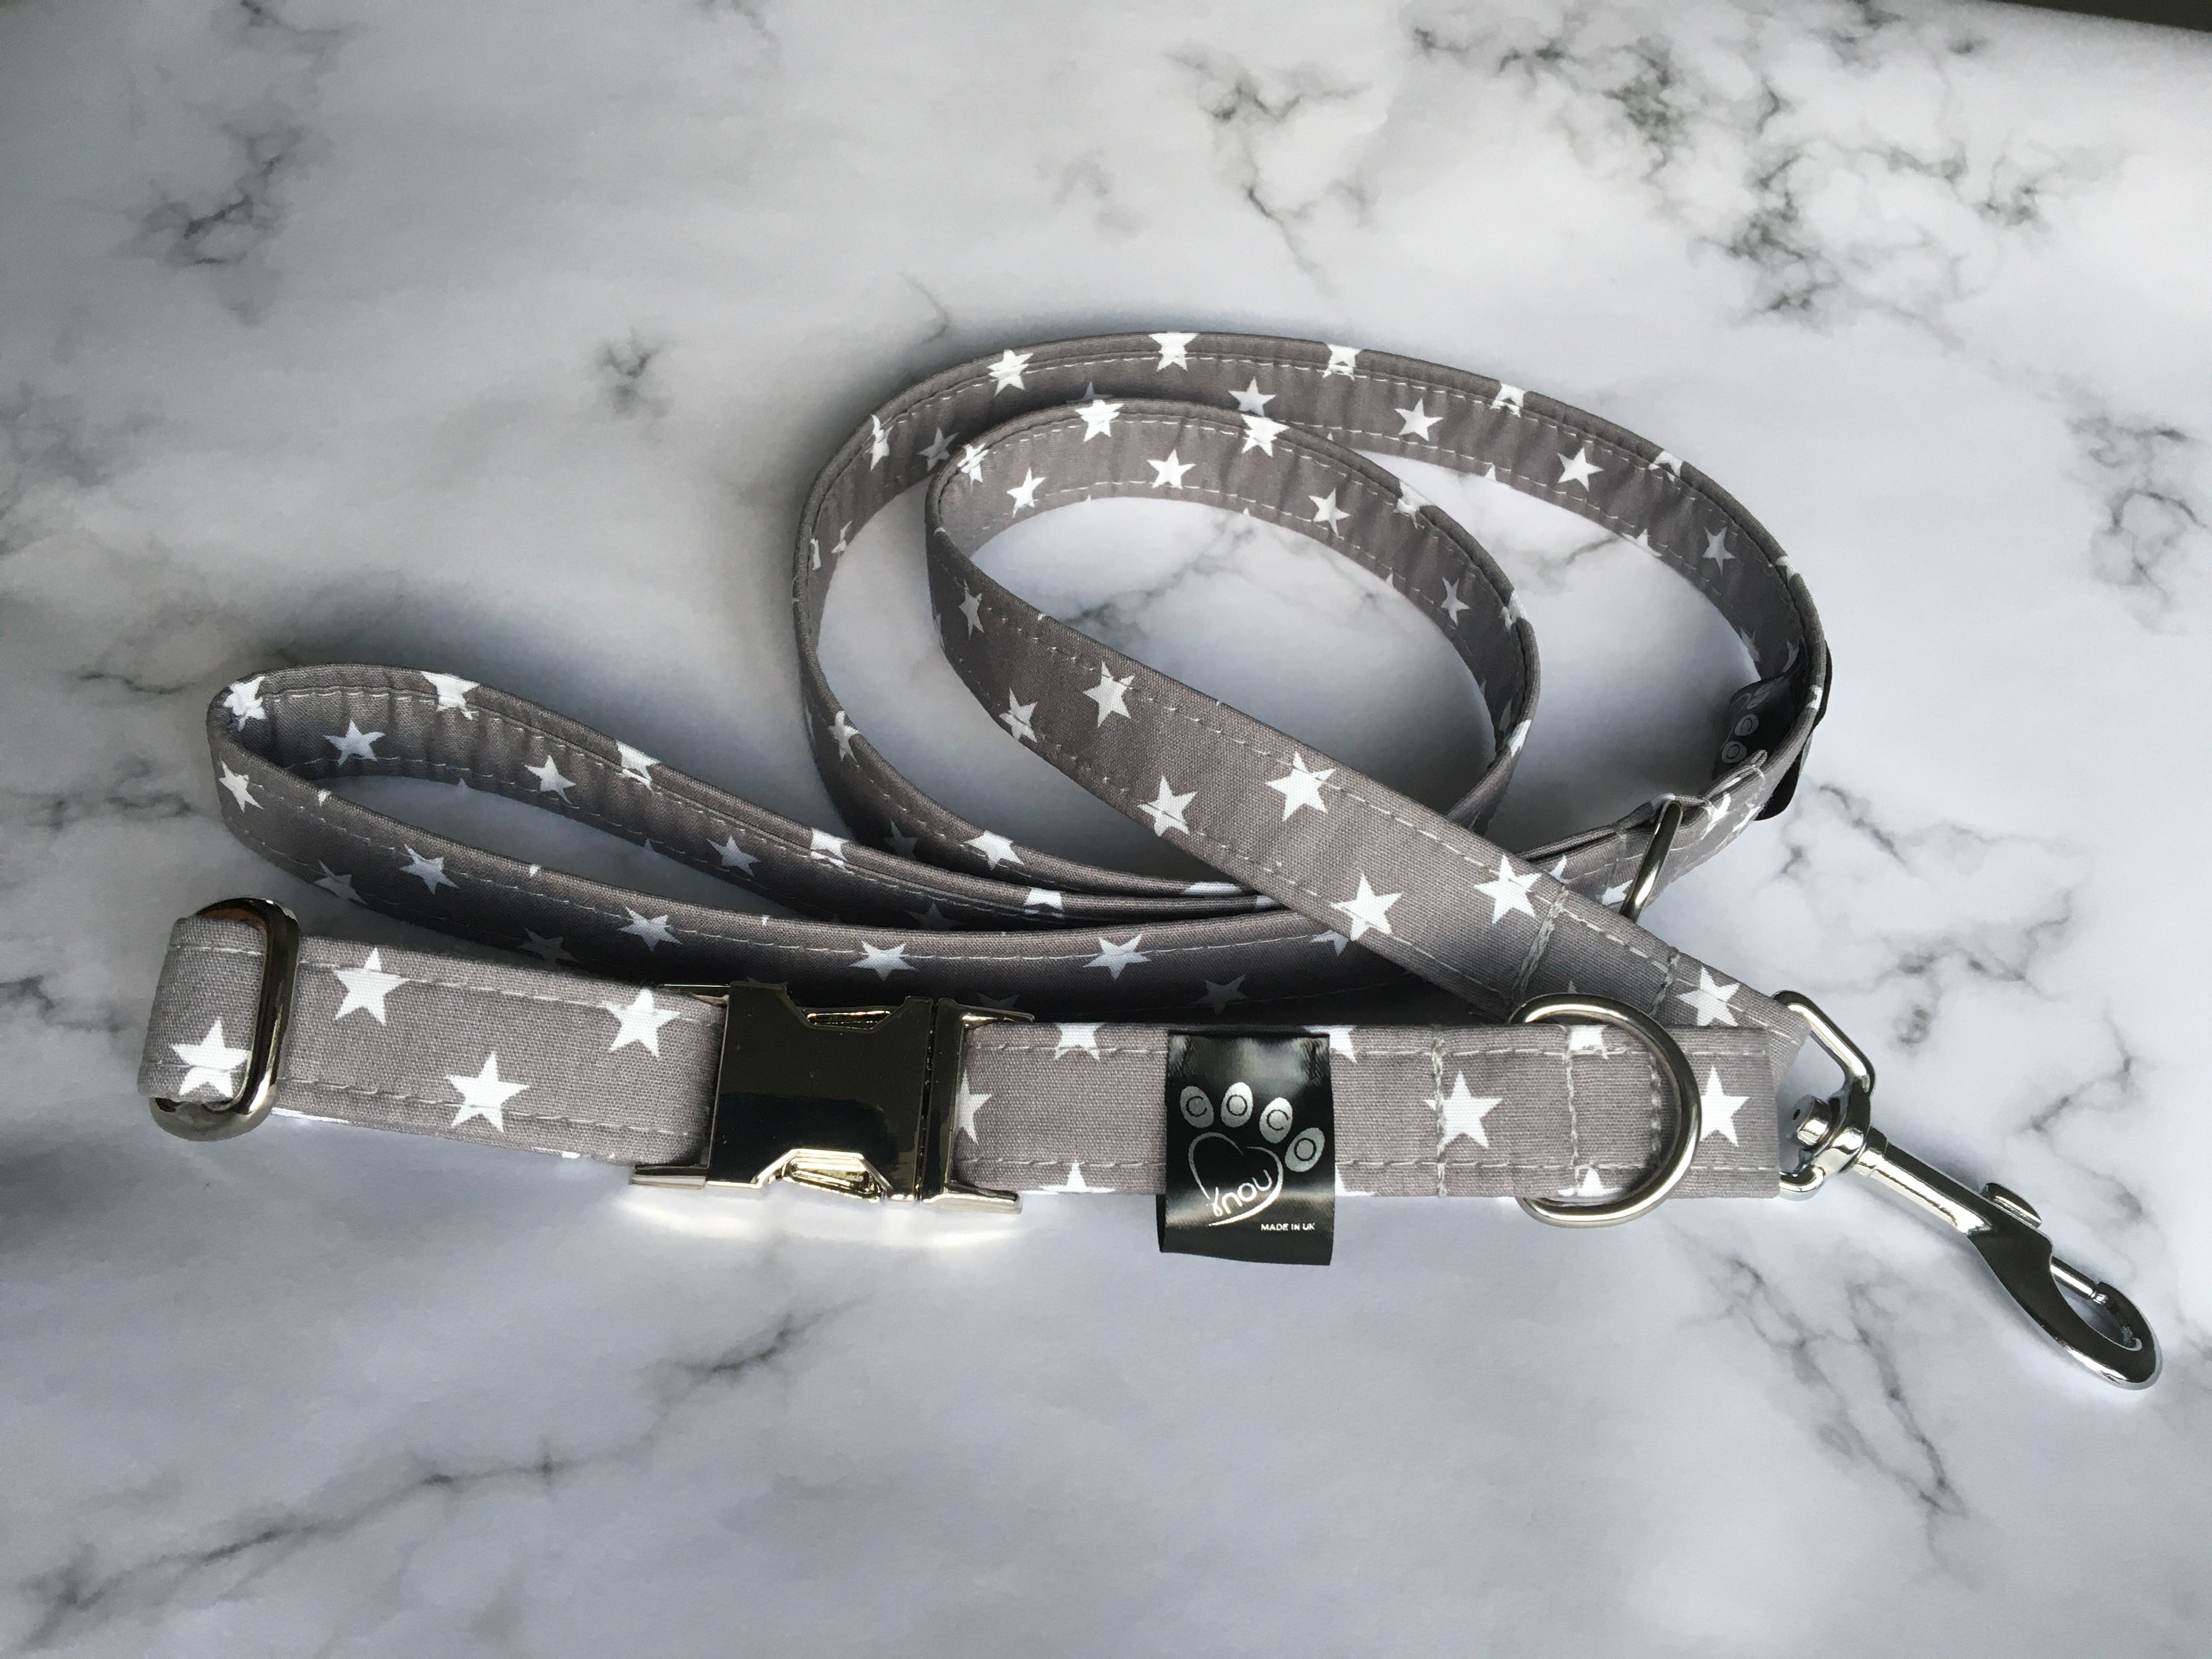 "Super-Star" Print Fabric Covered Collar and Lead Set